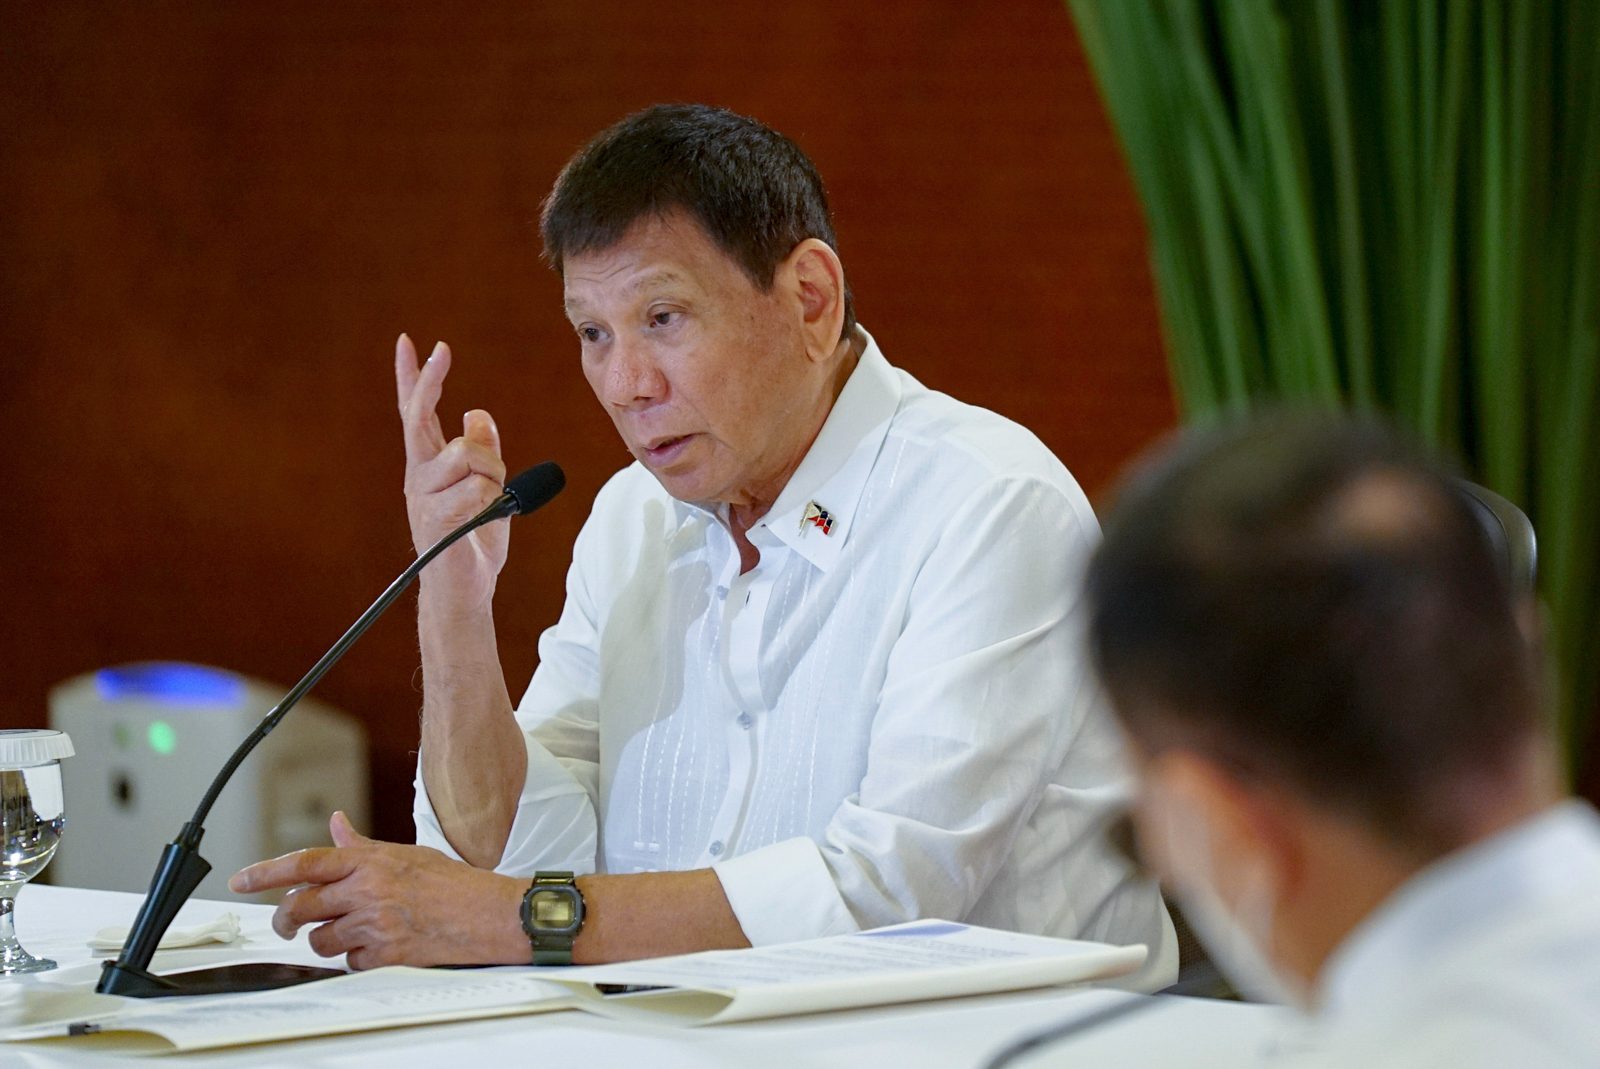 Duterte signs law easing restrictions on foreign investments